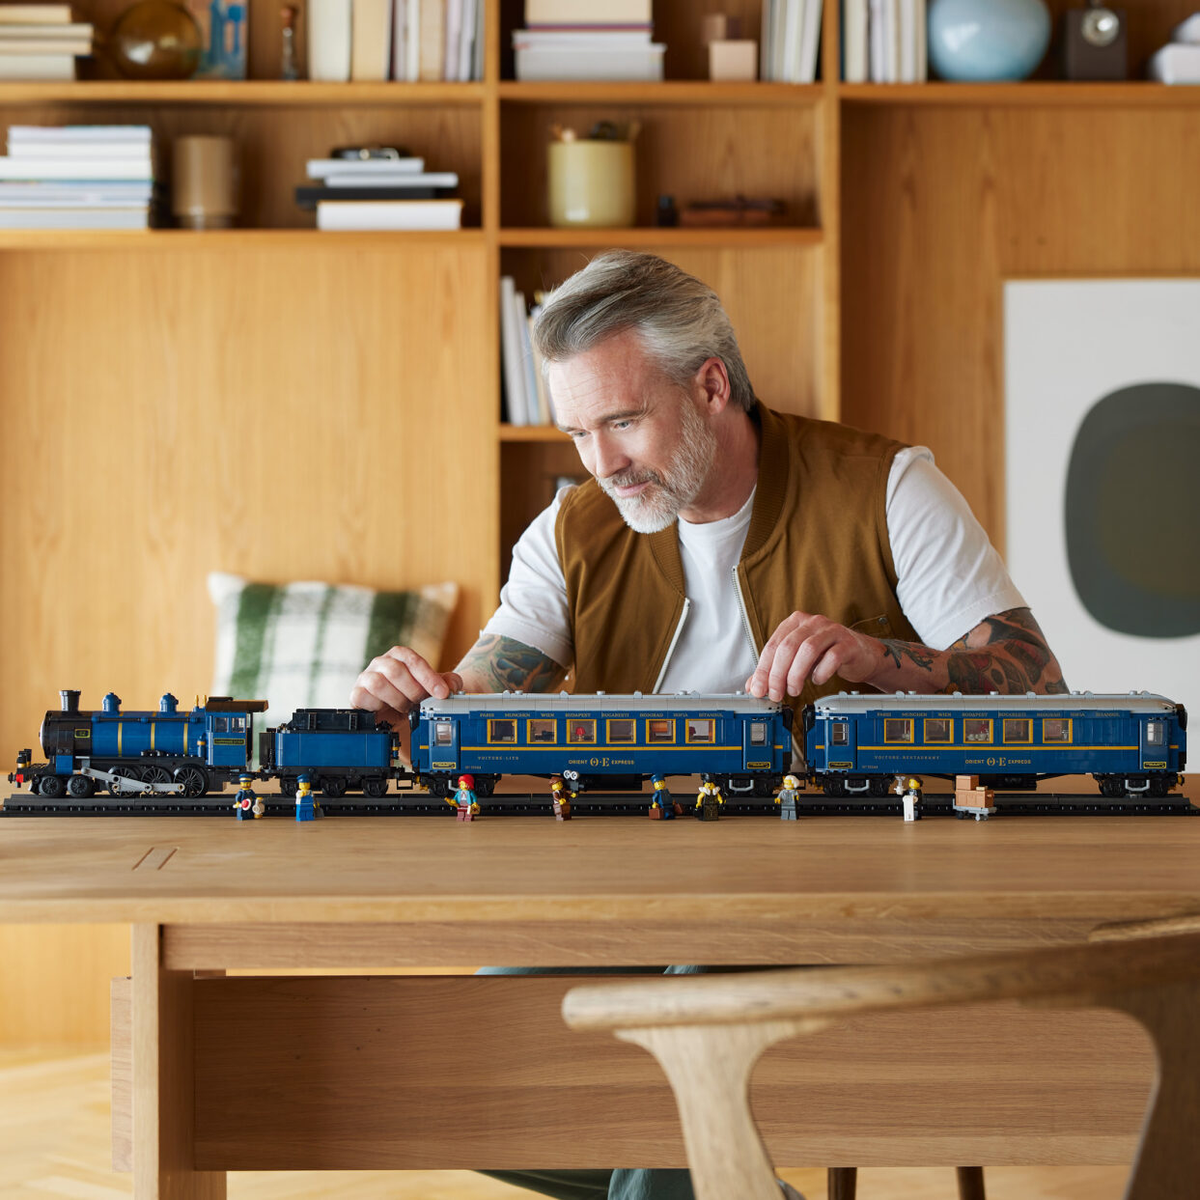 Get Aboard This Lego Ideas Orient Express As It Will Become a Real Set in  the Near Future - autoevolution